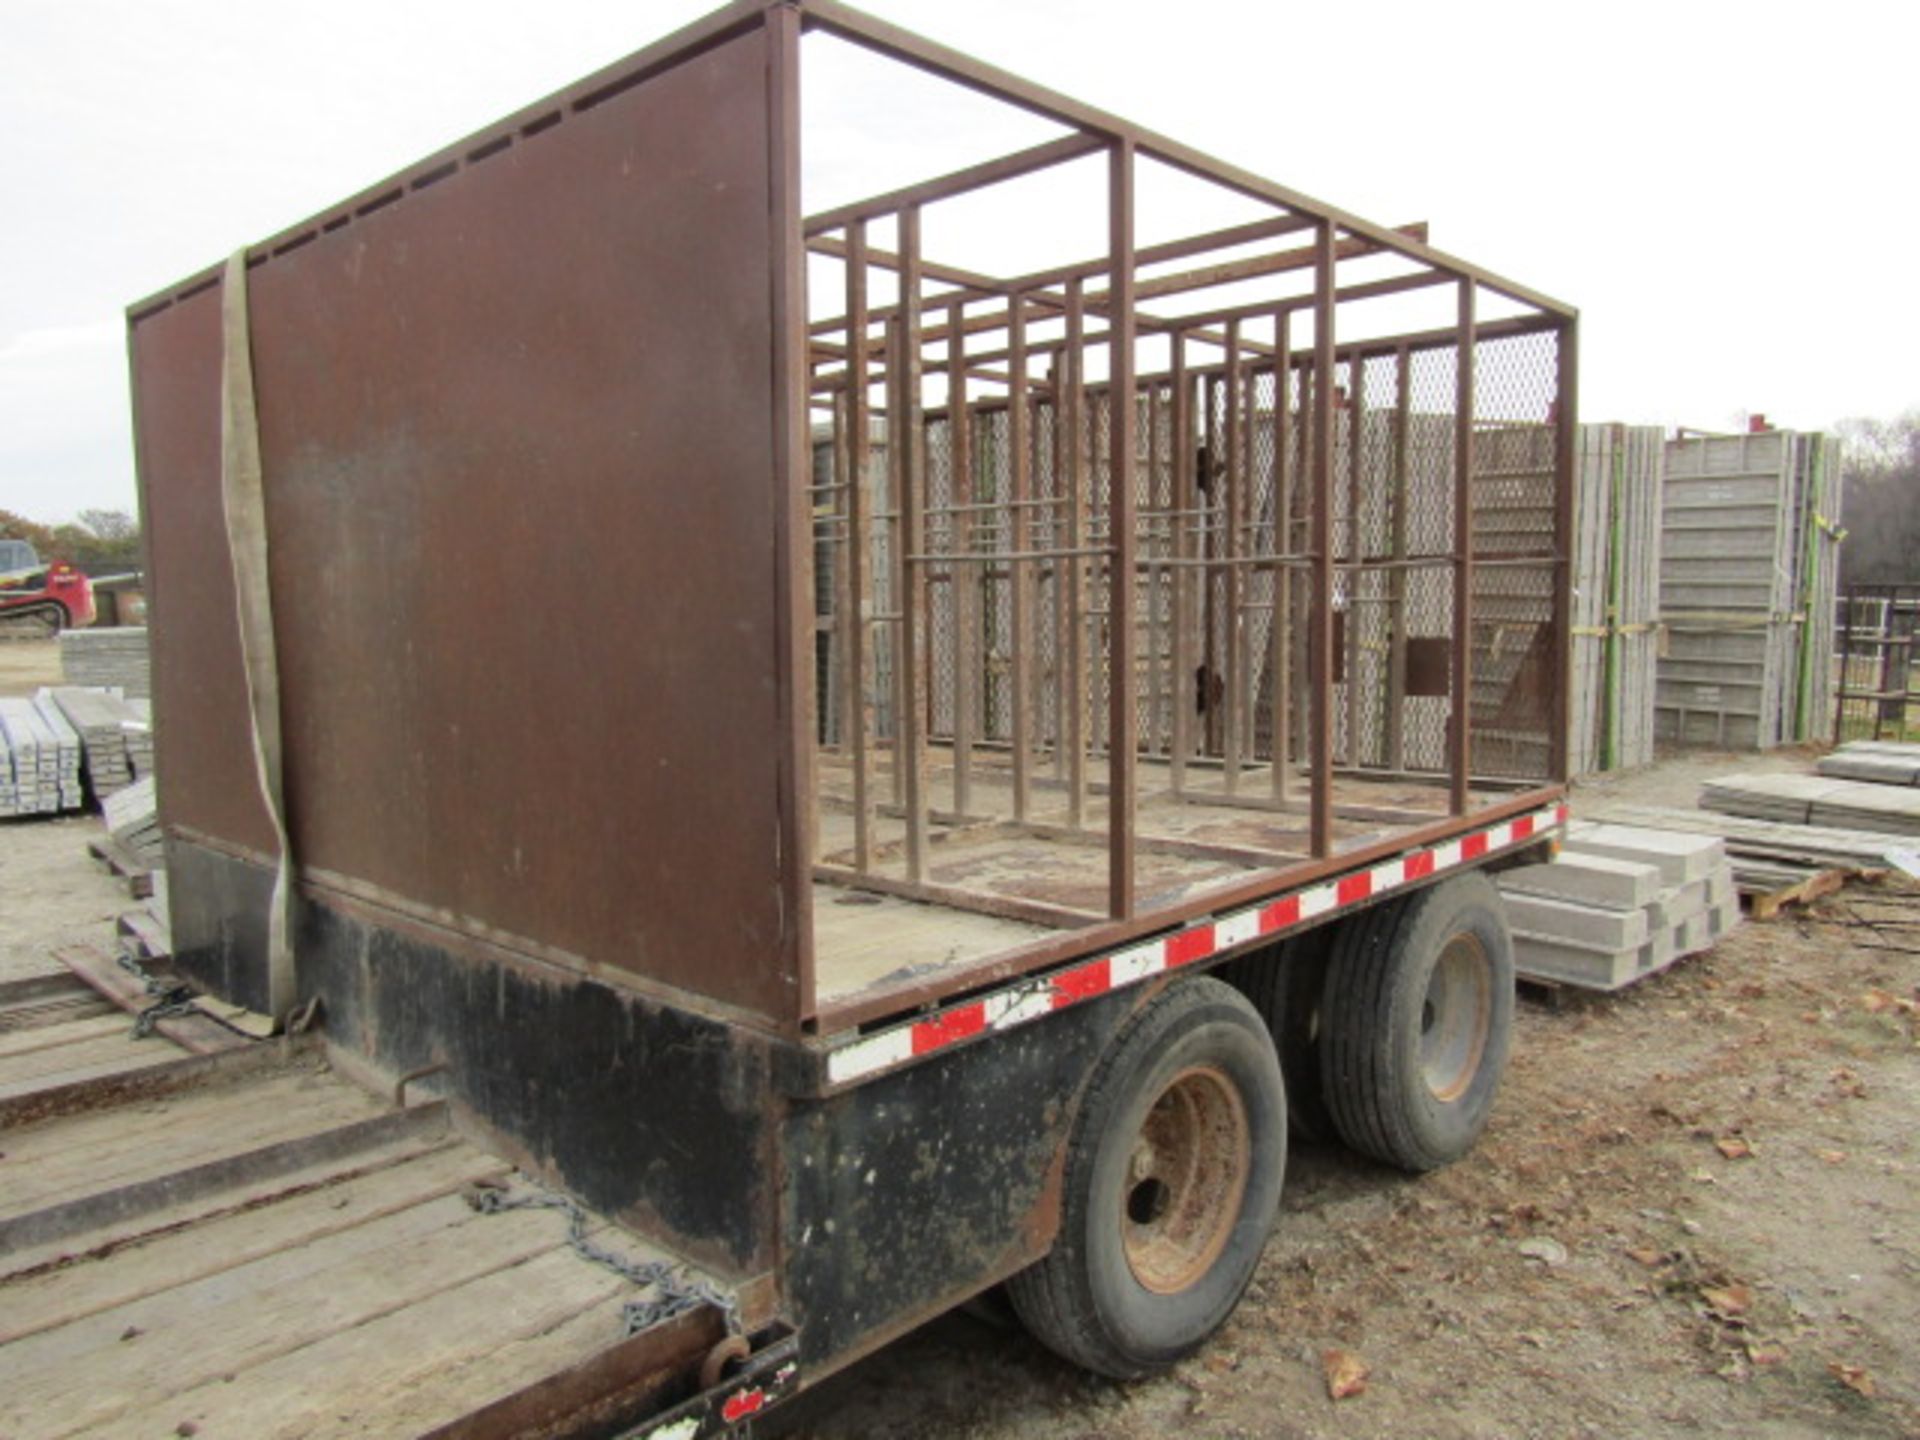 2004 B-B Gooseneck Trailer, Tandem Axle, 18' 8" x 9' 6" Well, 8' 7" Top Deck, Located in - Image 5 of 9